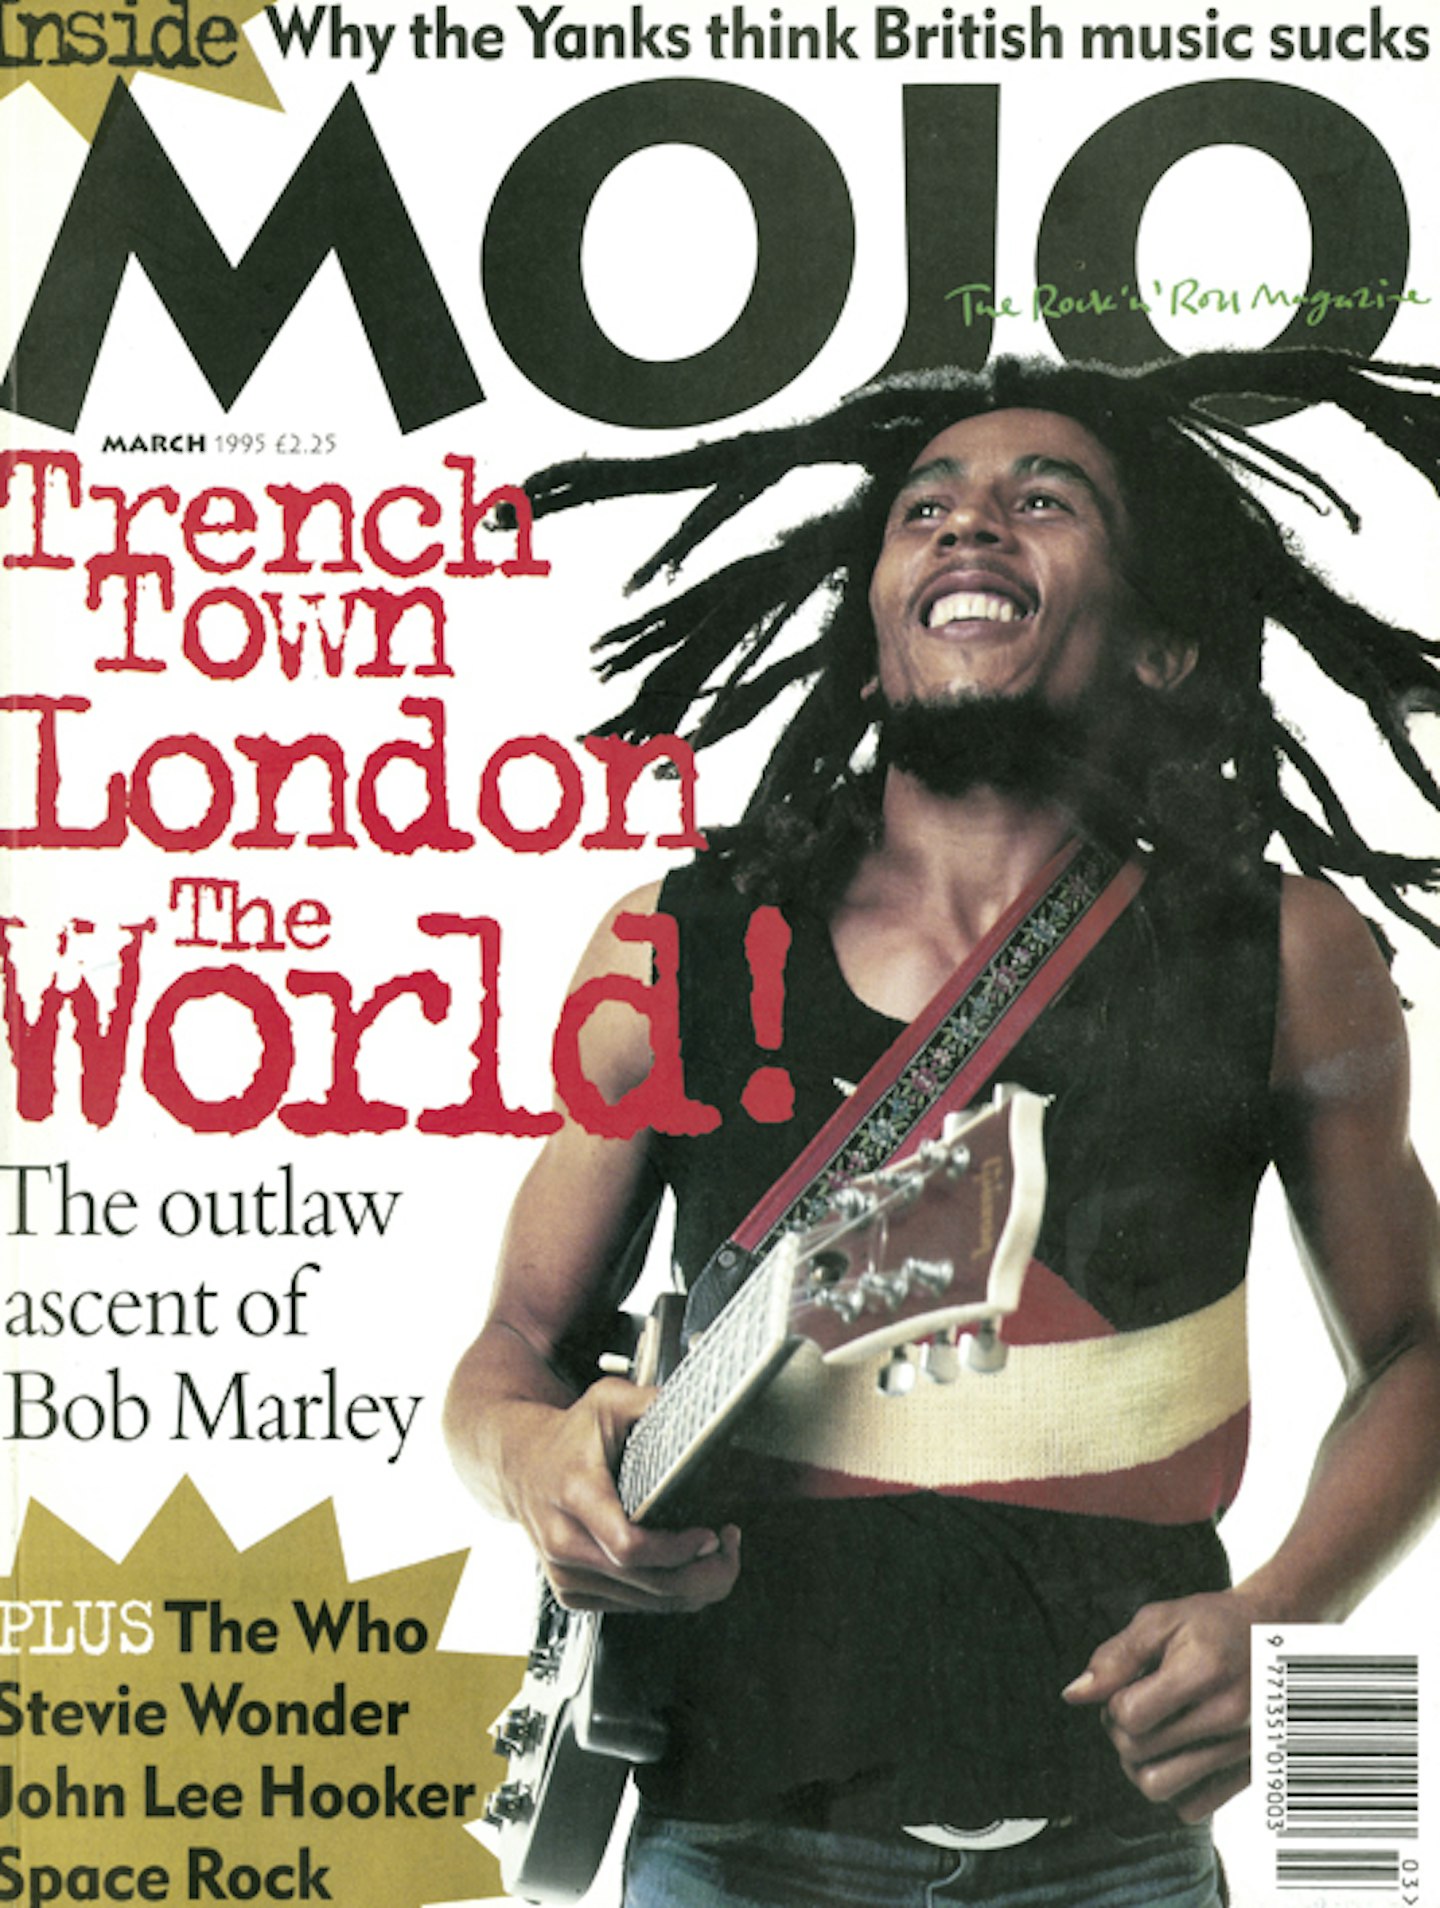 MOJO Issue 16 / March 1995